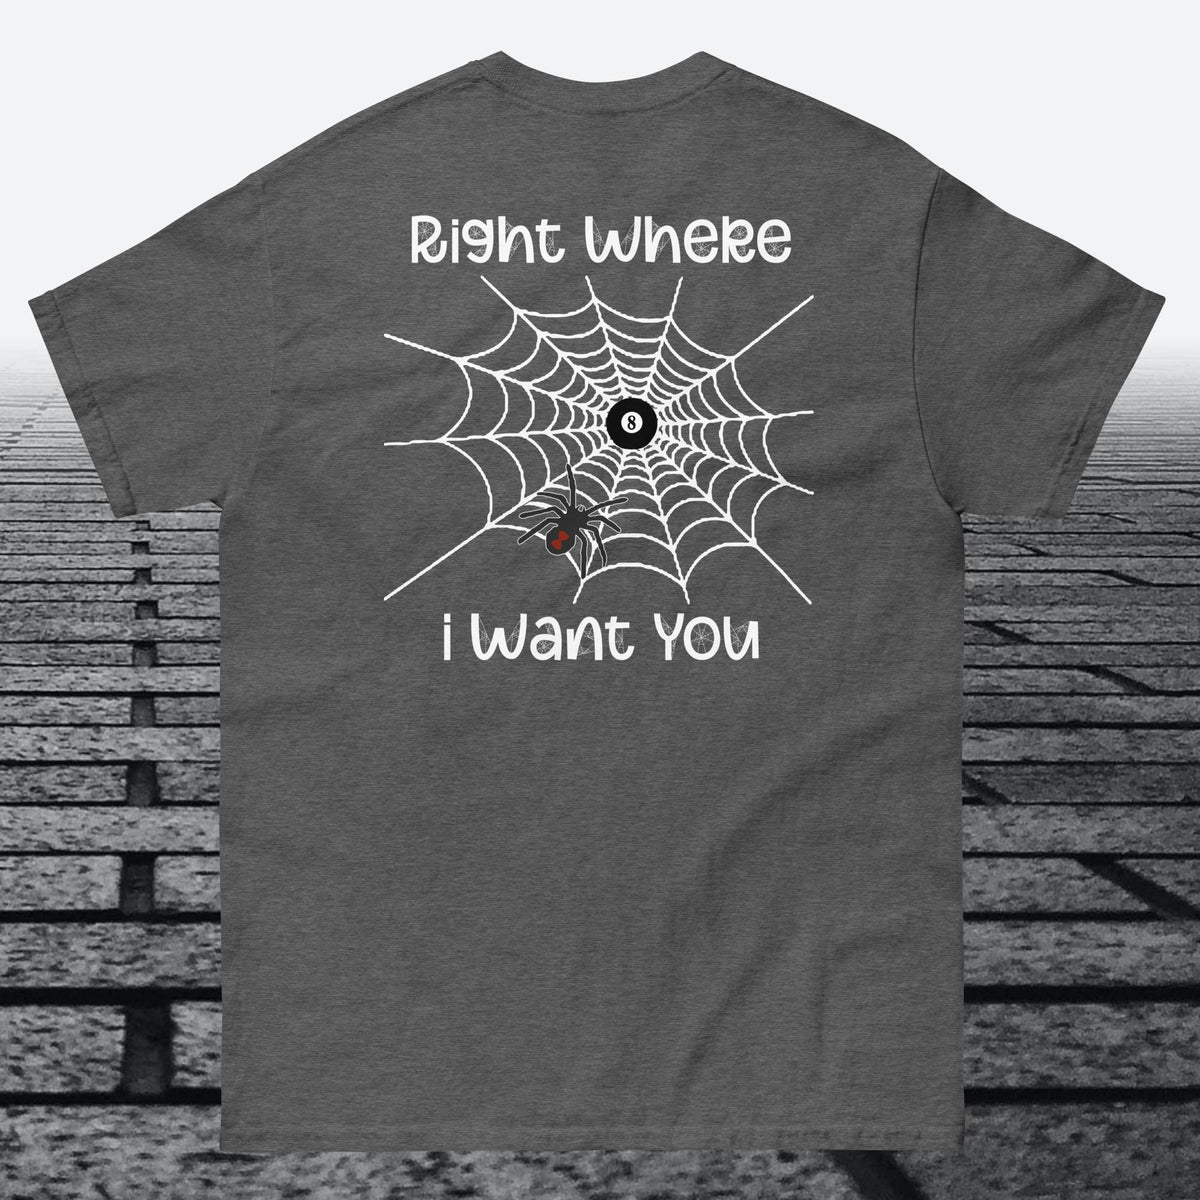 Right Where I Want You, logo on the front, Cotton t-shirt